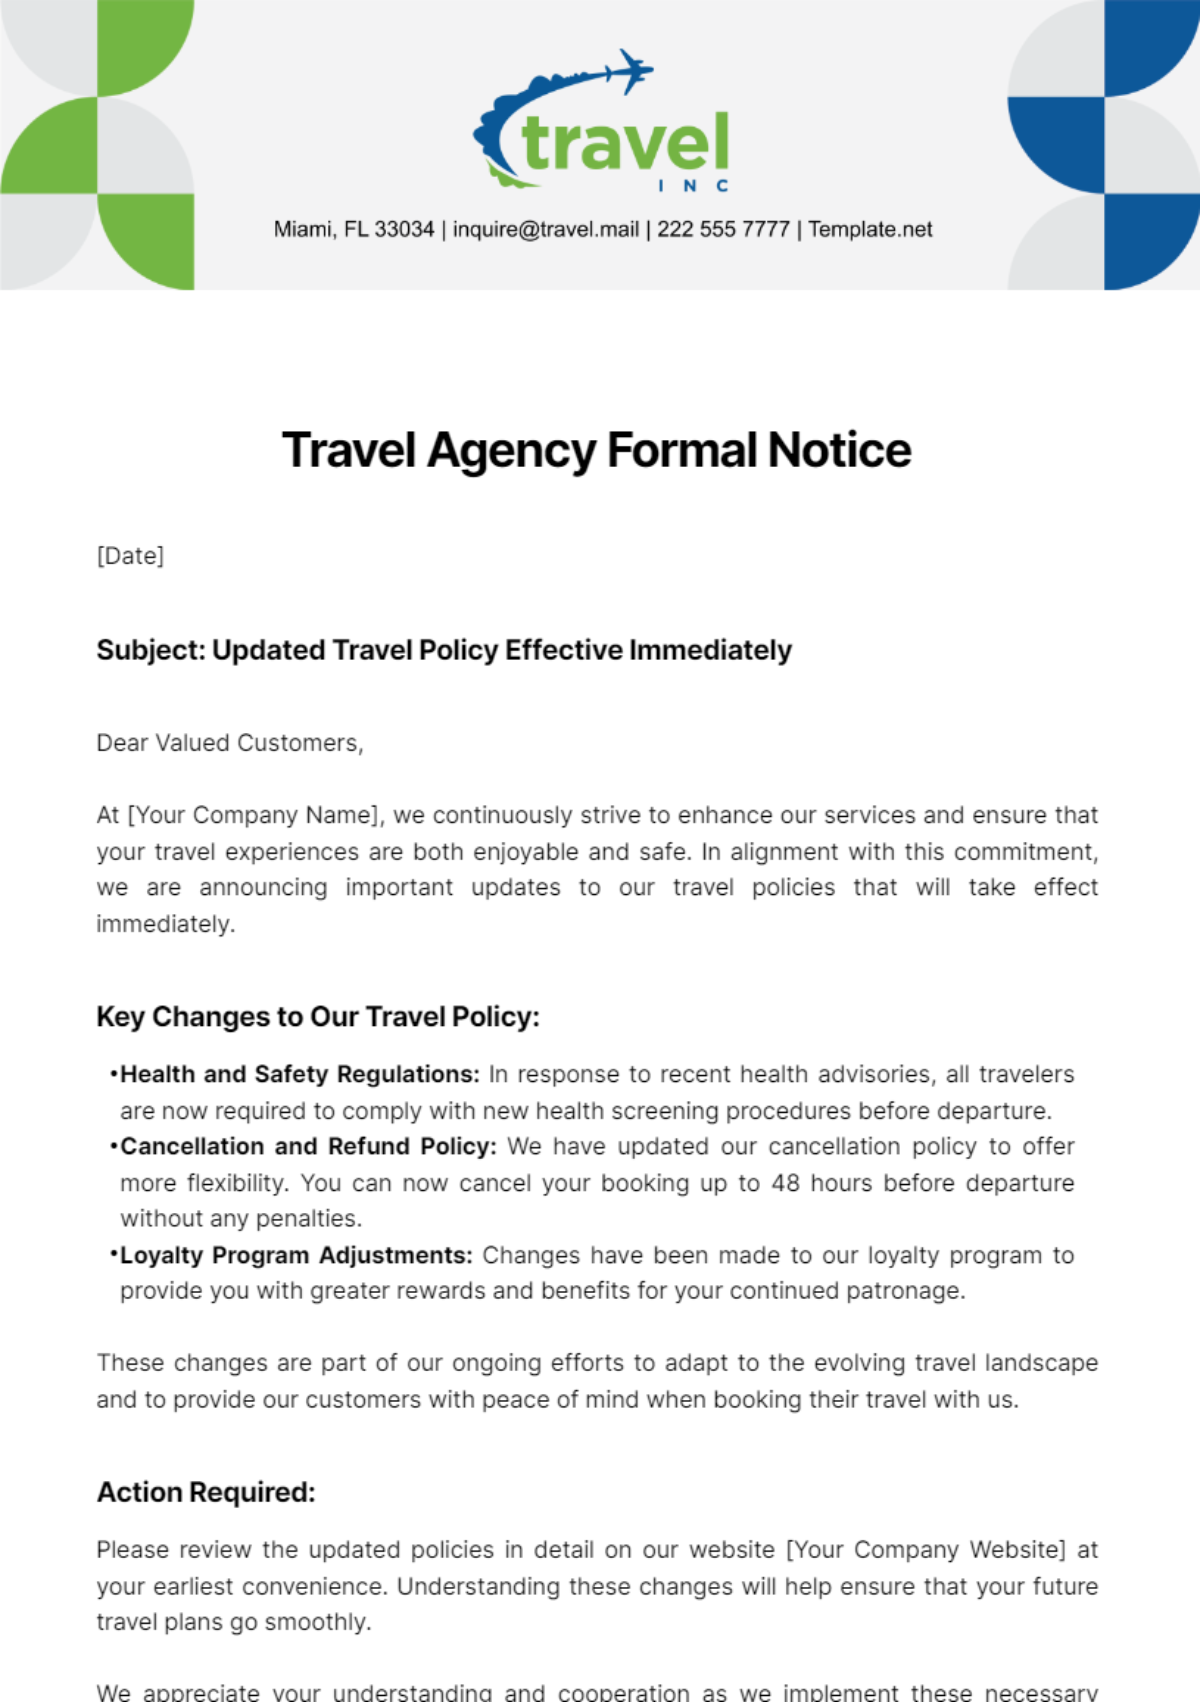 Free Travel Agency Formal Notice Template